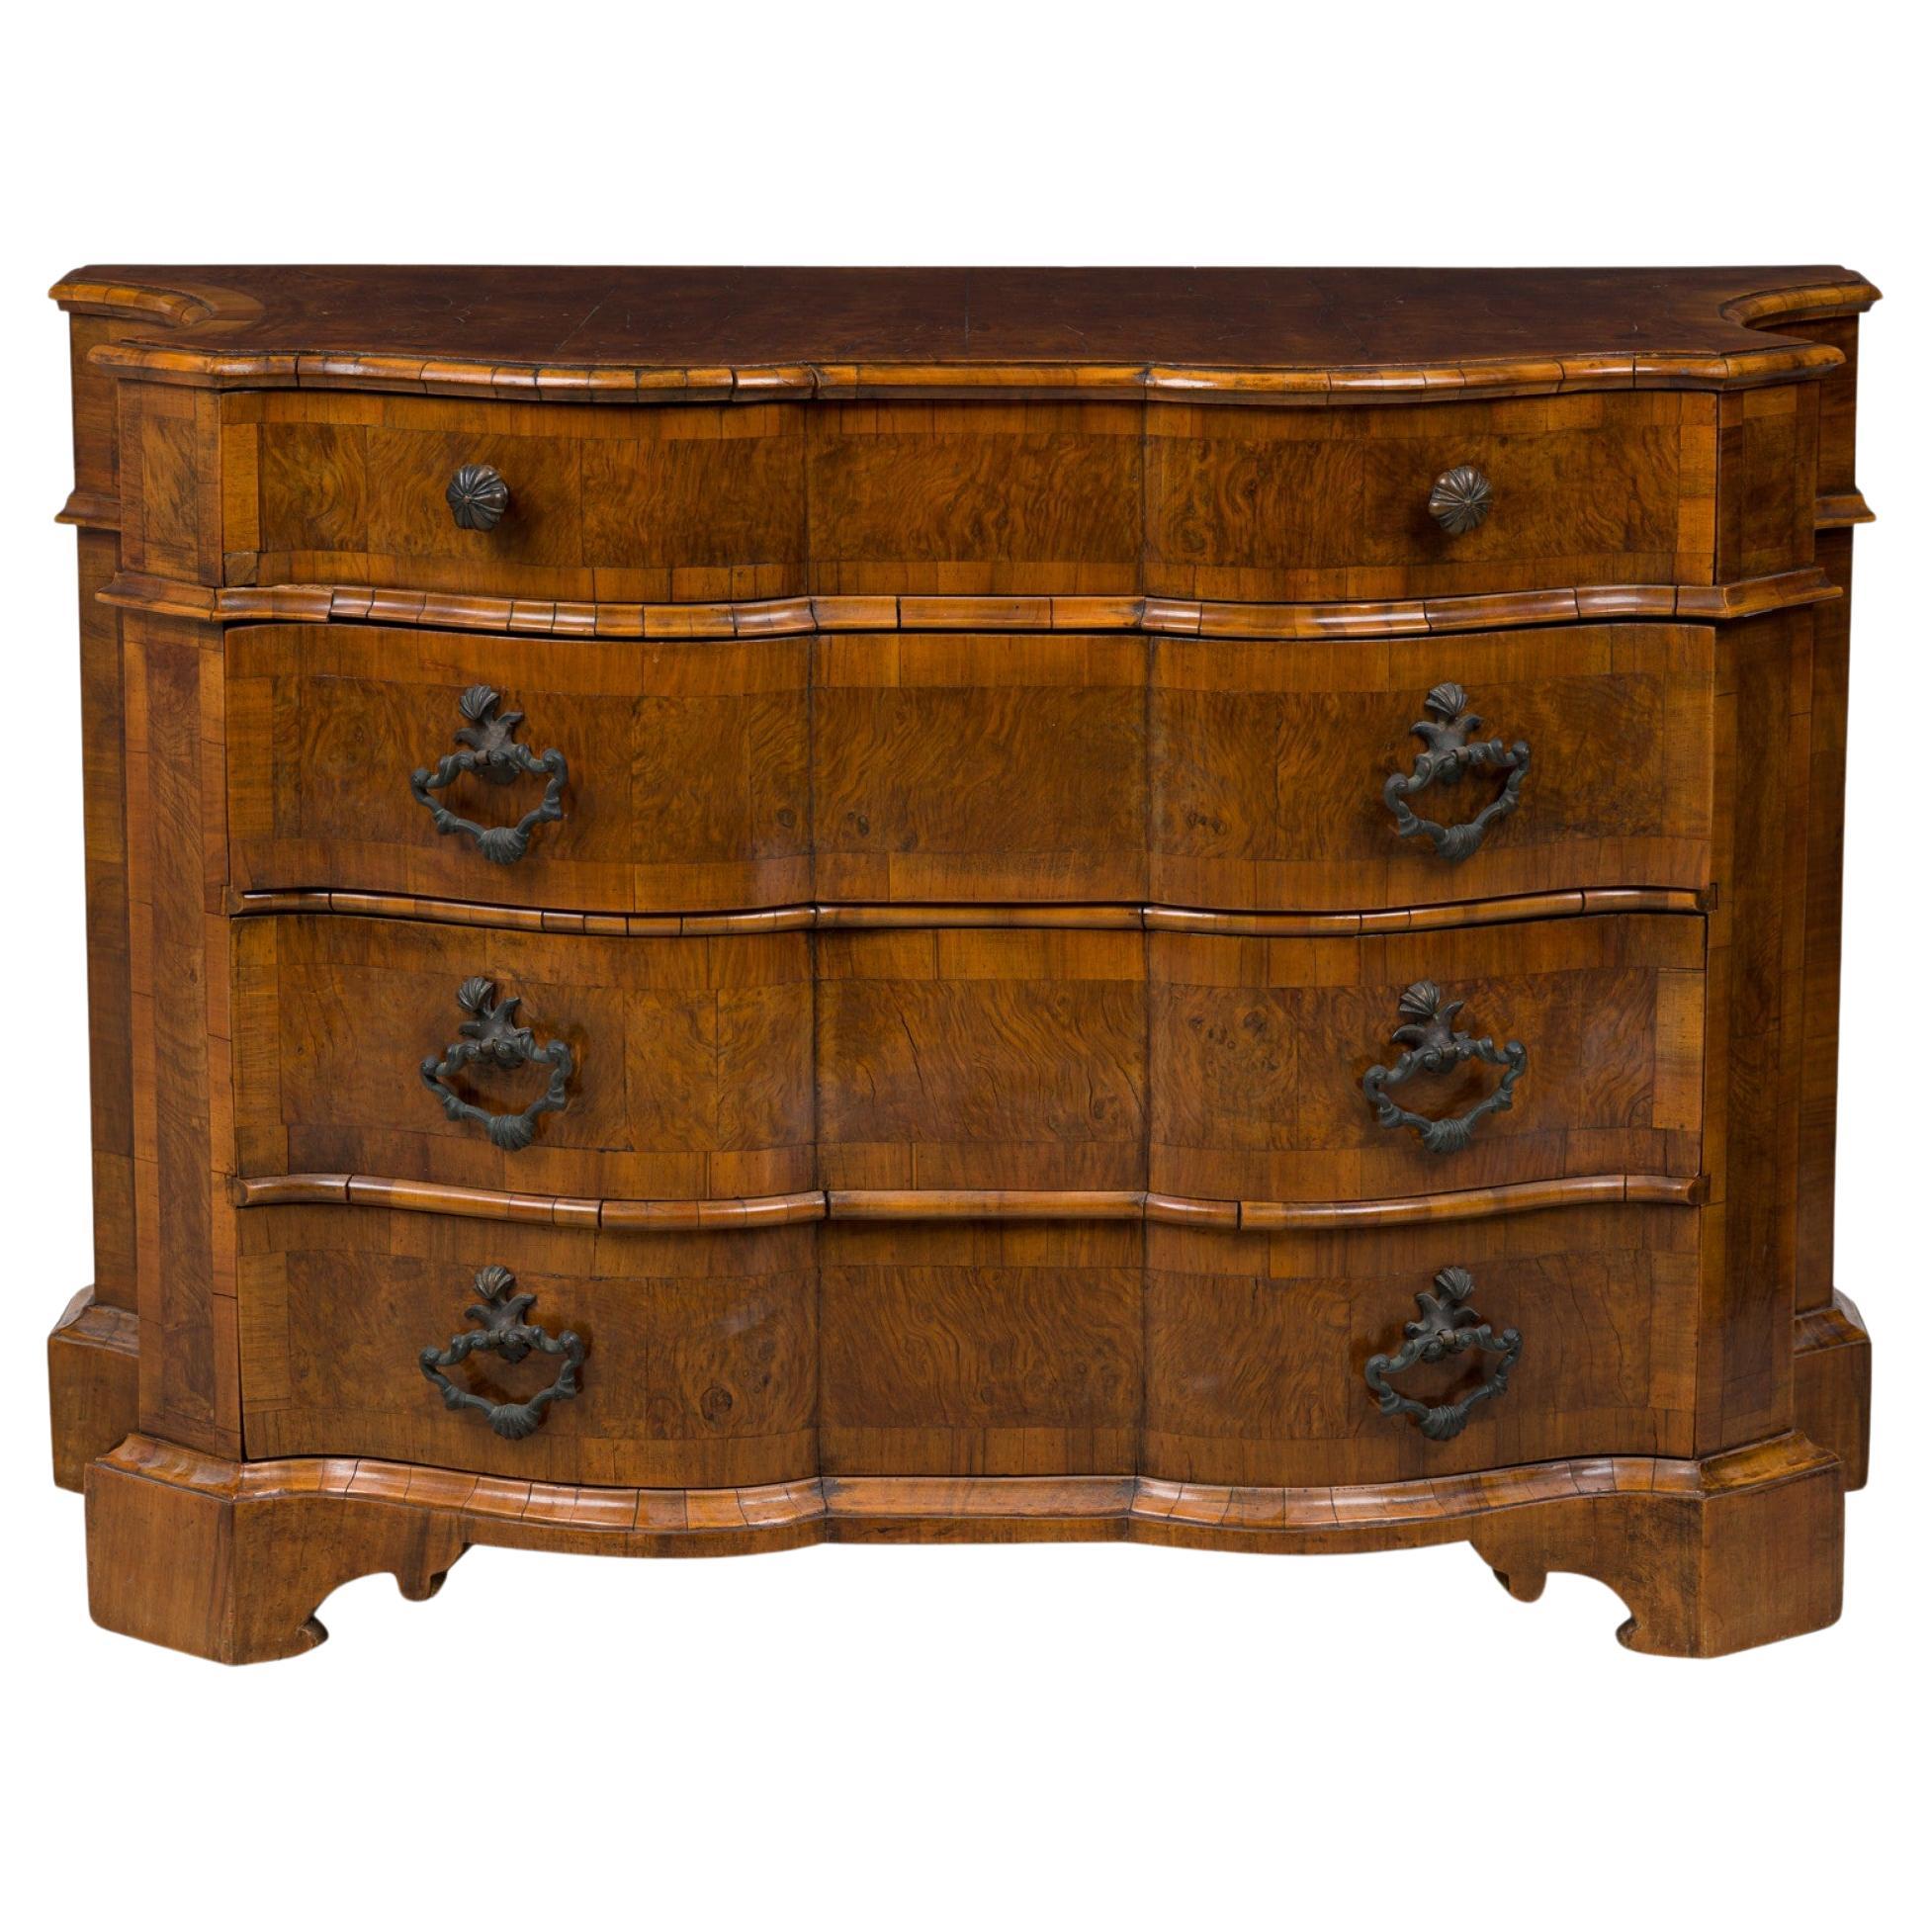 Italian Venetian Serpentine Olivewood & Bronze Mounted 4 Drawer Commode / Chest